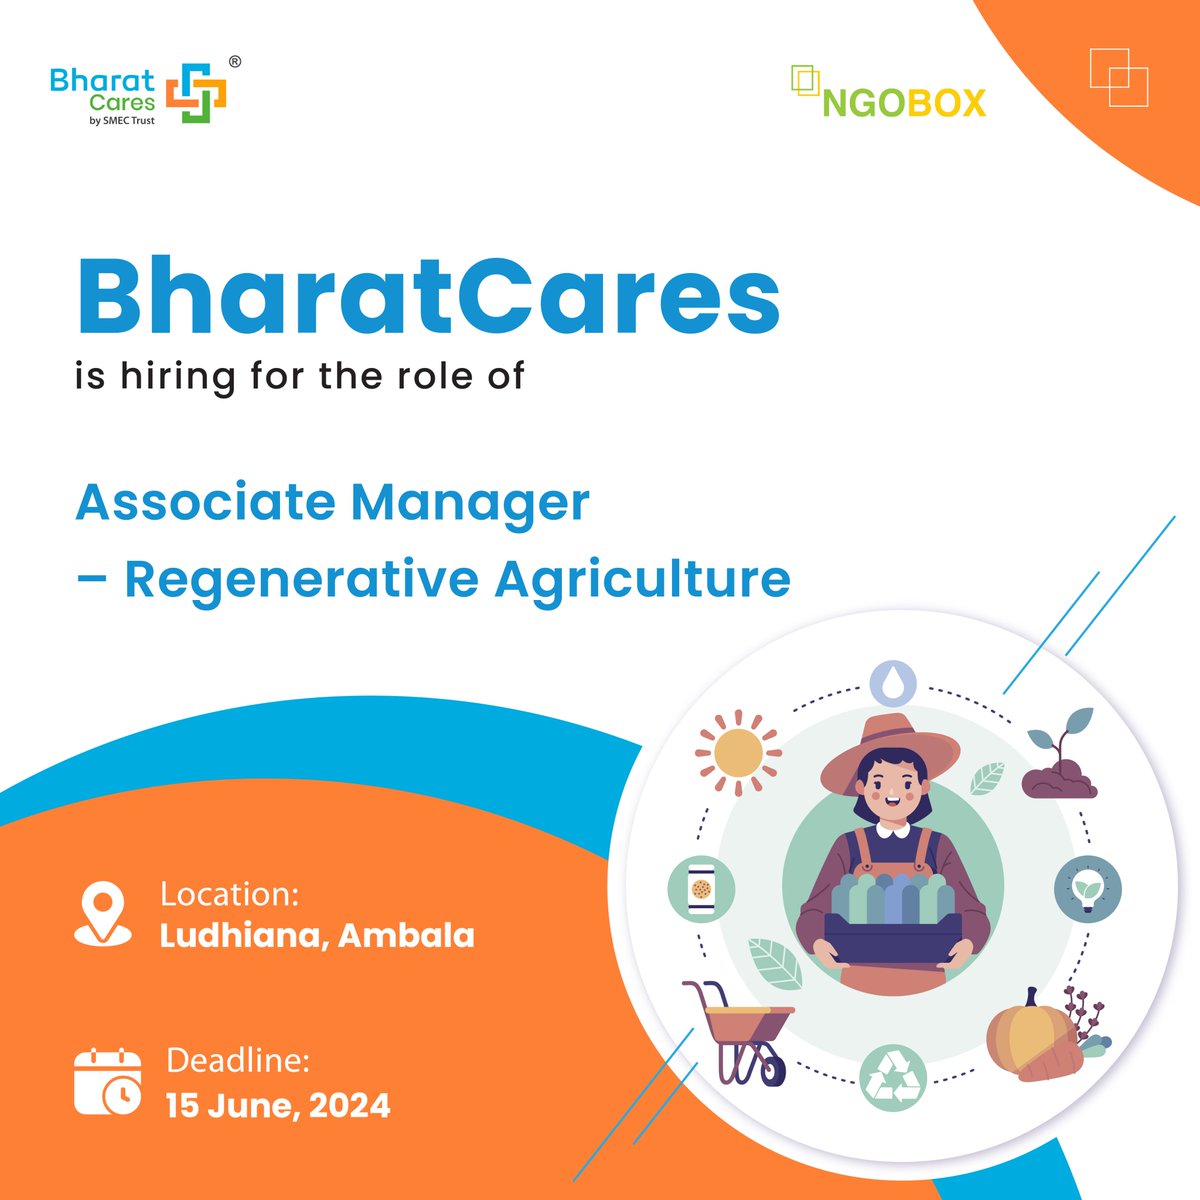 #JobOpening @bharatcaresorg is hiring for the role of - Associate Manager – Regenerative Agriculture - Location: Ludhiana - [ngobox.org/job-detail_Ass…] Ambala- [ngobox.org/job-detail_Ass…] Deadline: 15 June 2024 #JobOpening #BharatCares #RegenerativeAgriculture #Ludhiana #Ambala